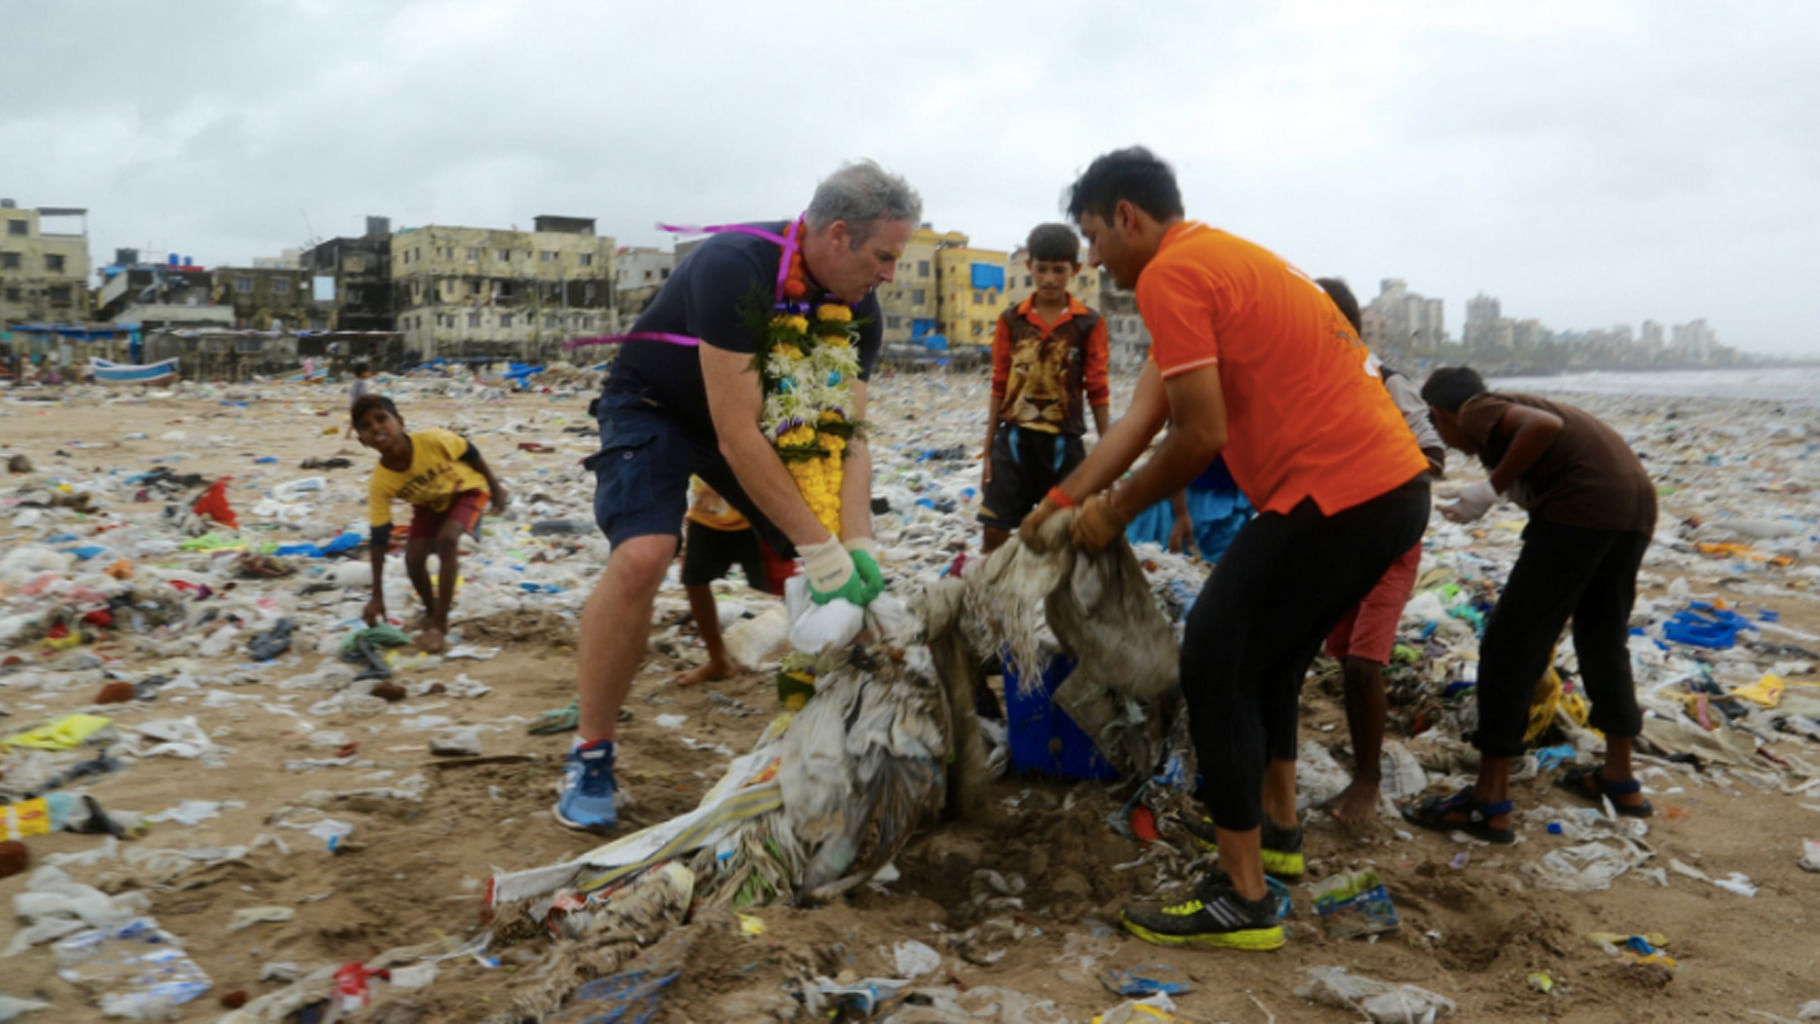 The United Nations’ Patron of the Oceans, Lewis Pugh flew down to Mumbai to participate in the biggest beach clean up in history at Versova, Mumbai on Saturday, 6 August 2016. (Photo courtesy: Twitter/<a href="https://twitter.com/search?f=images&amp;vertical=default&amp;q=versova&amp;src=typd">Lewis Pugh</a>) 